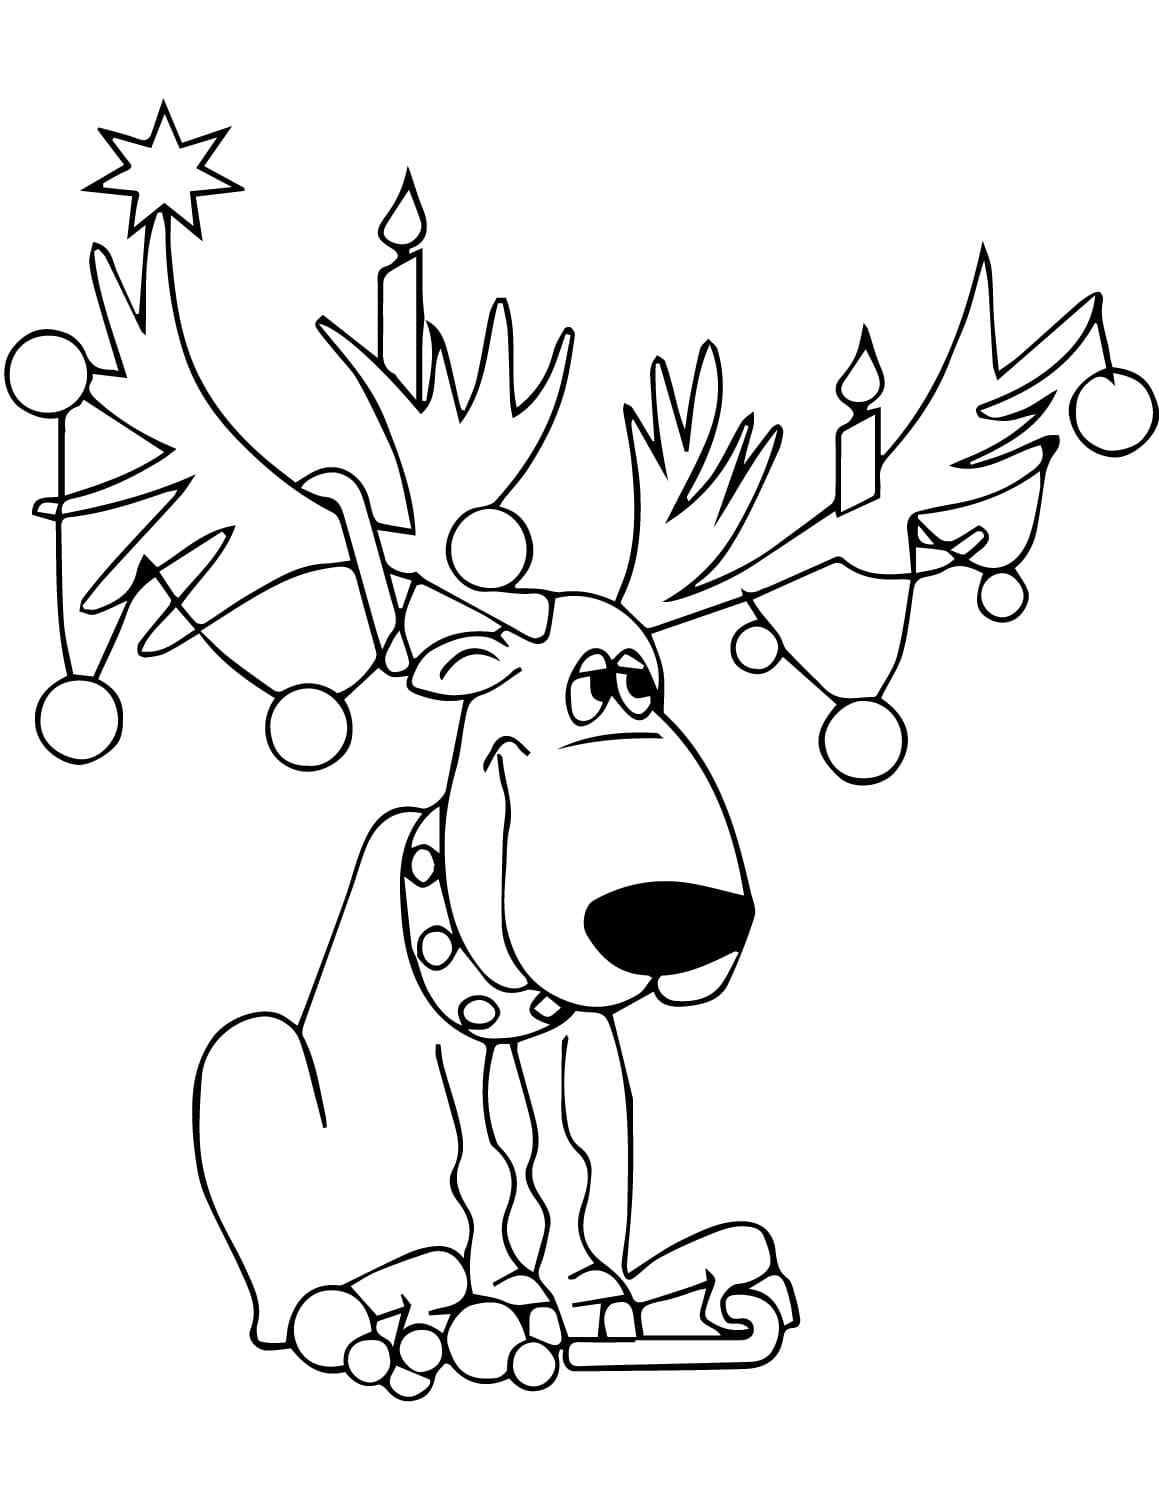 Christmas Light Bulbs For Children Coloring Page